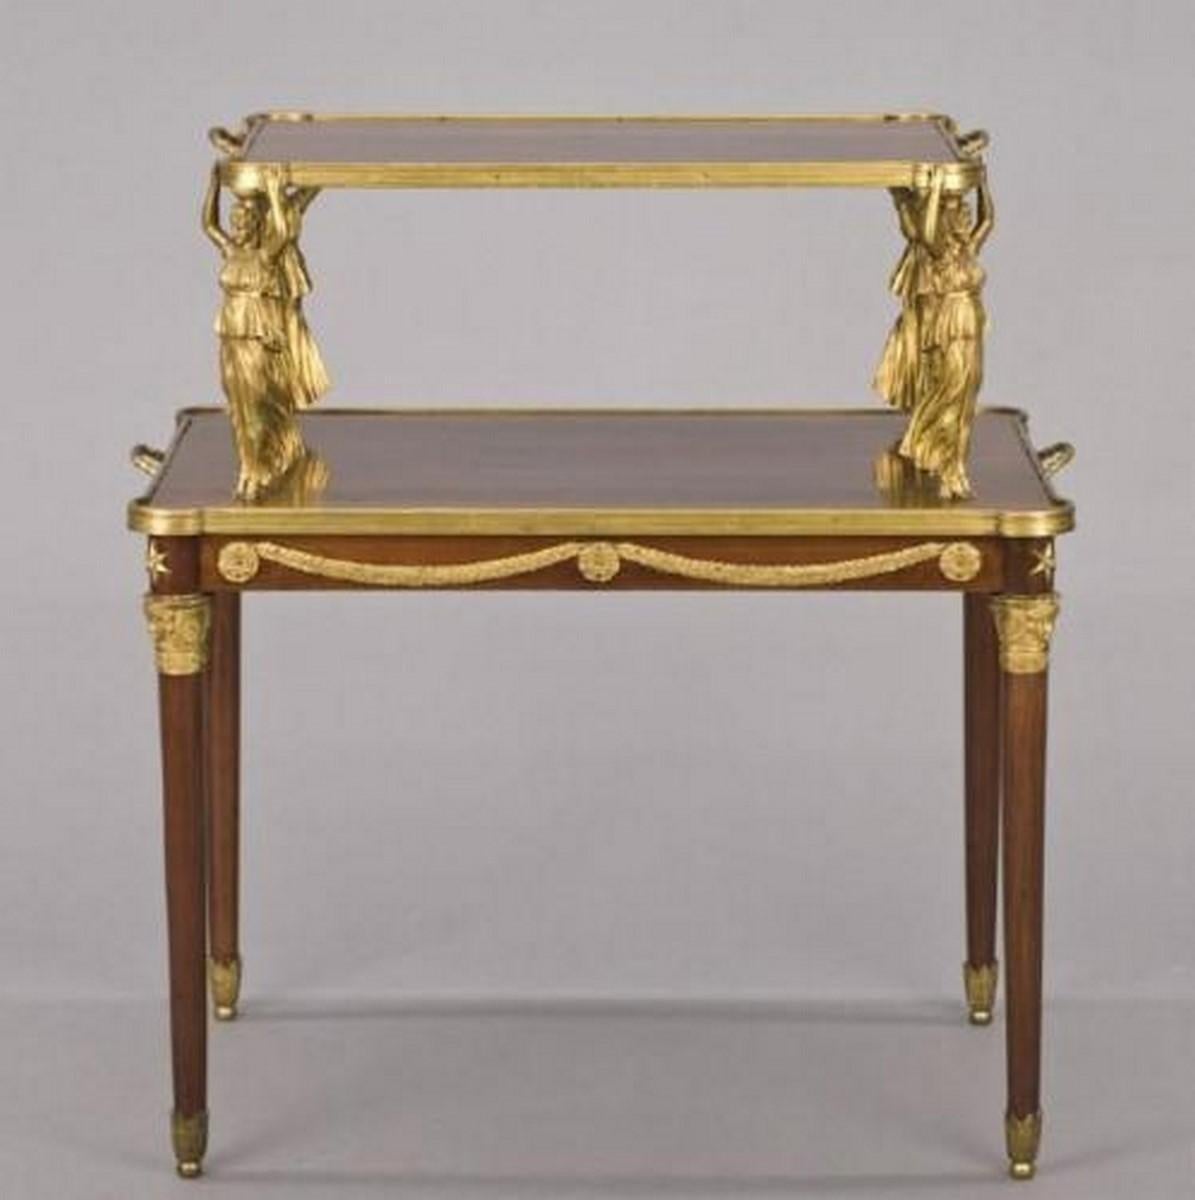 The Following Item we are Offering is An Outstanding French 19th Century Museum Quality Rare Empire-Style Mahagony and Gilt Bronze Tier Table, the top supported by standing female figures on a base with ormolu swags to the aprons and supported by